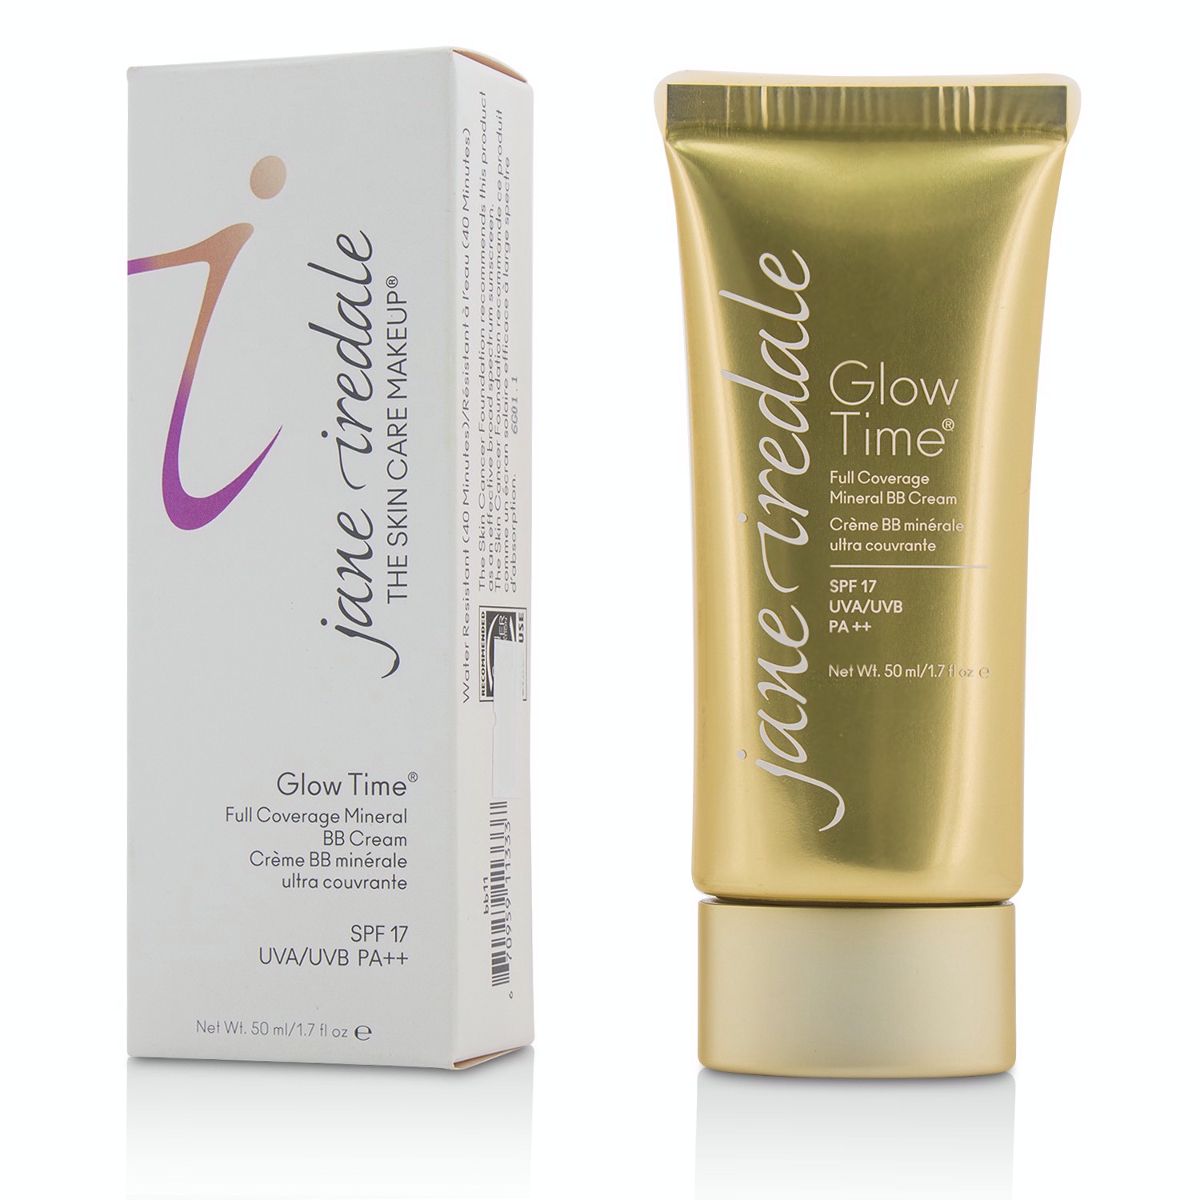 Glow Time Full Coverage Mineral BB Cream SPF 17 - BB11 Jane Iredale Image